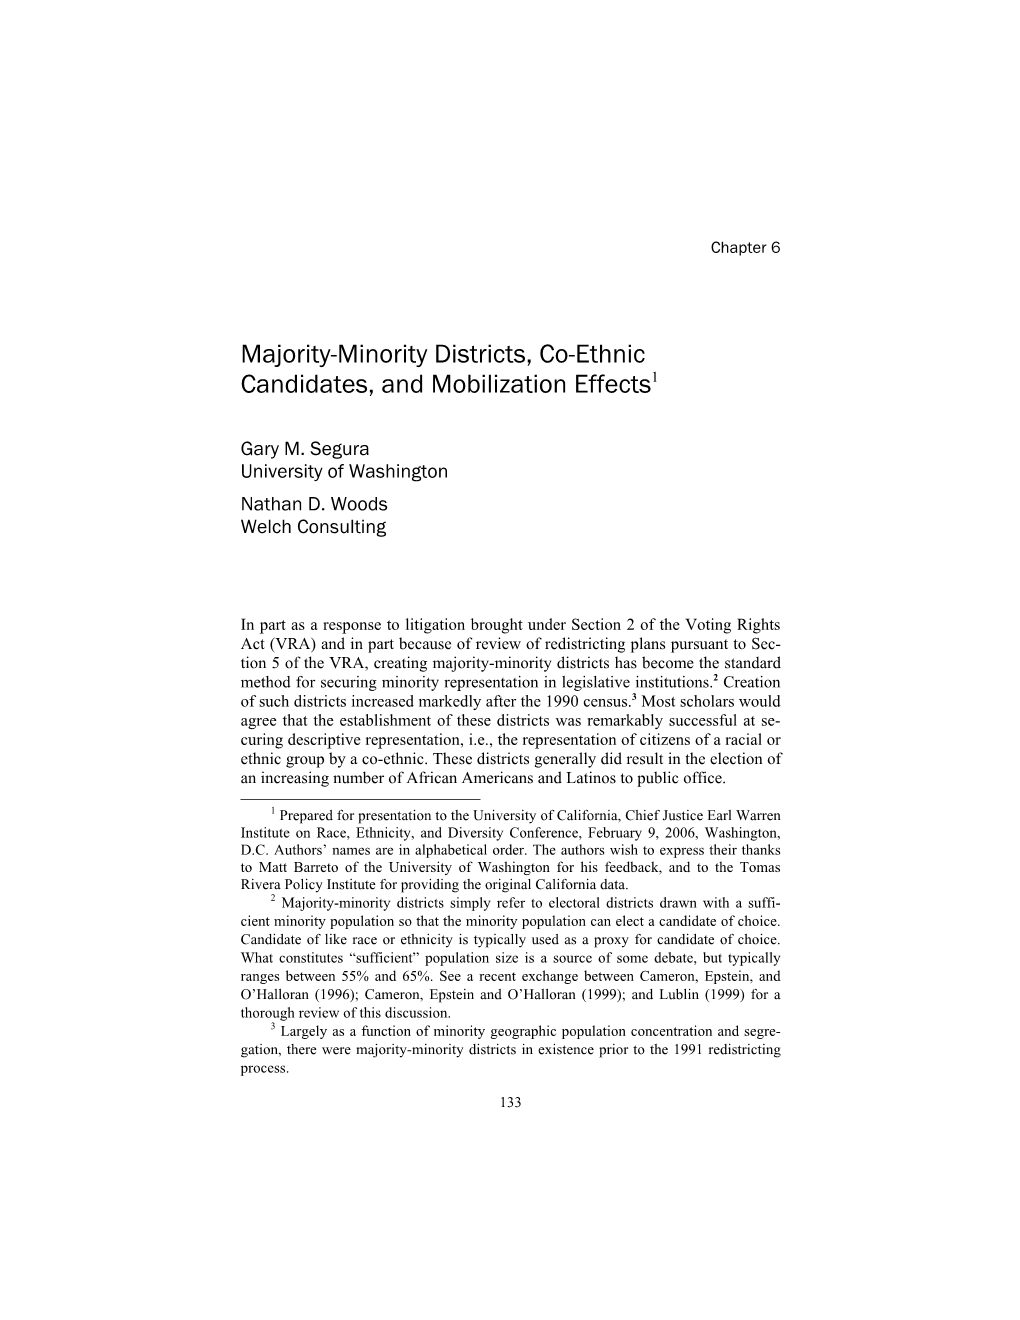 Majority-Minority Districts, Co-Ethnic Candidates, and Mobilization Effects1